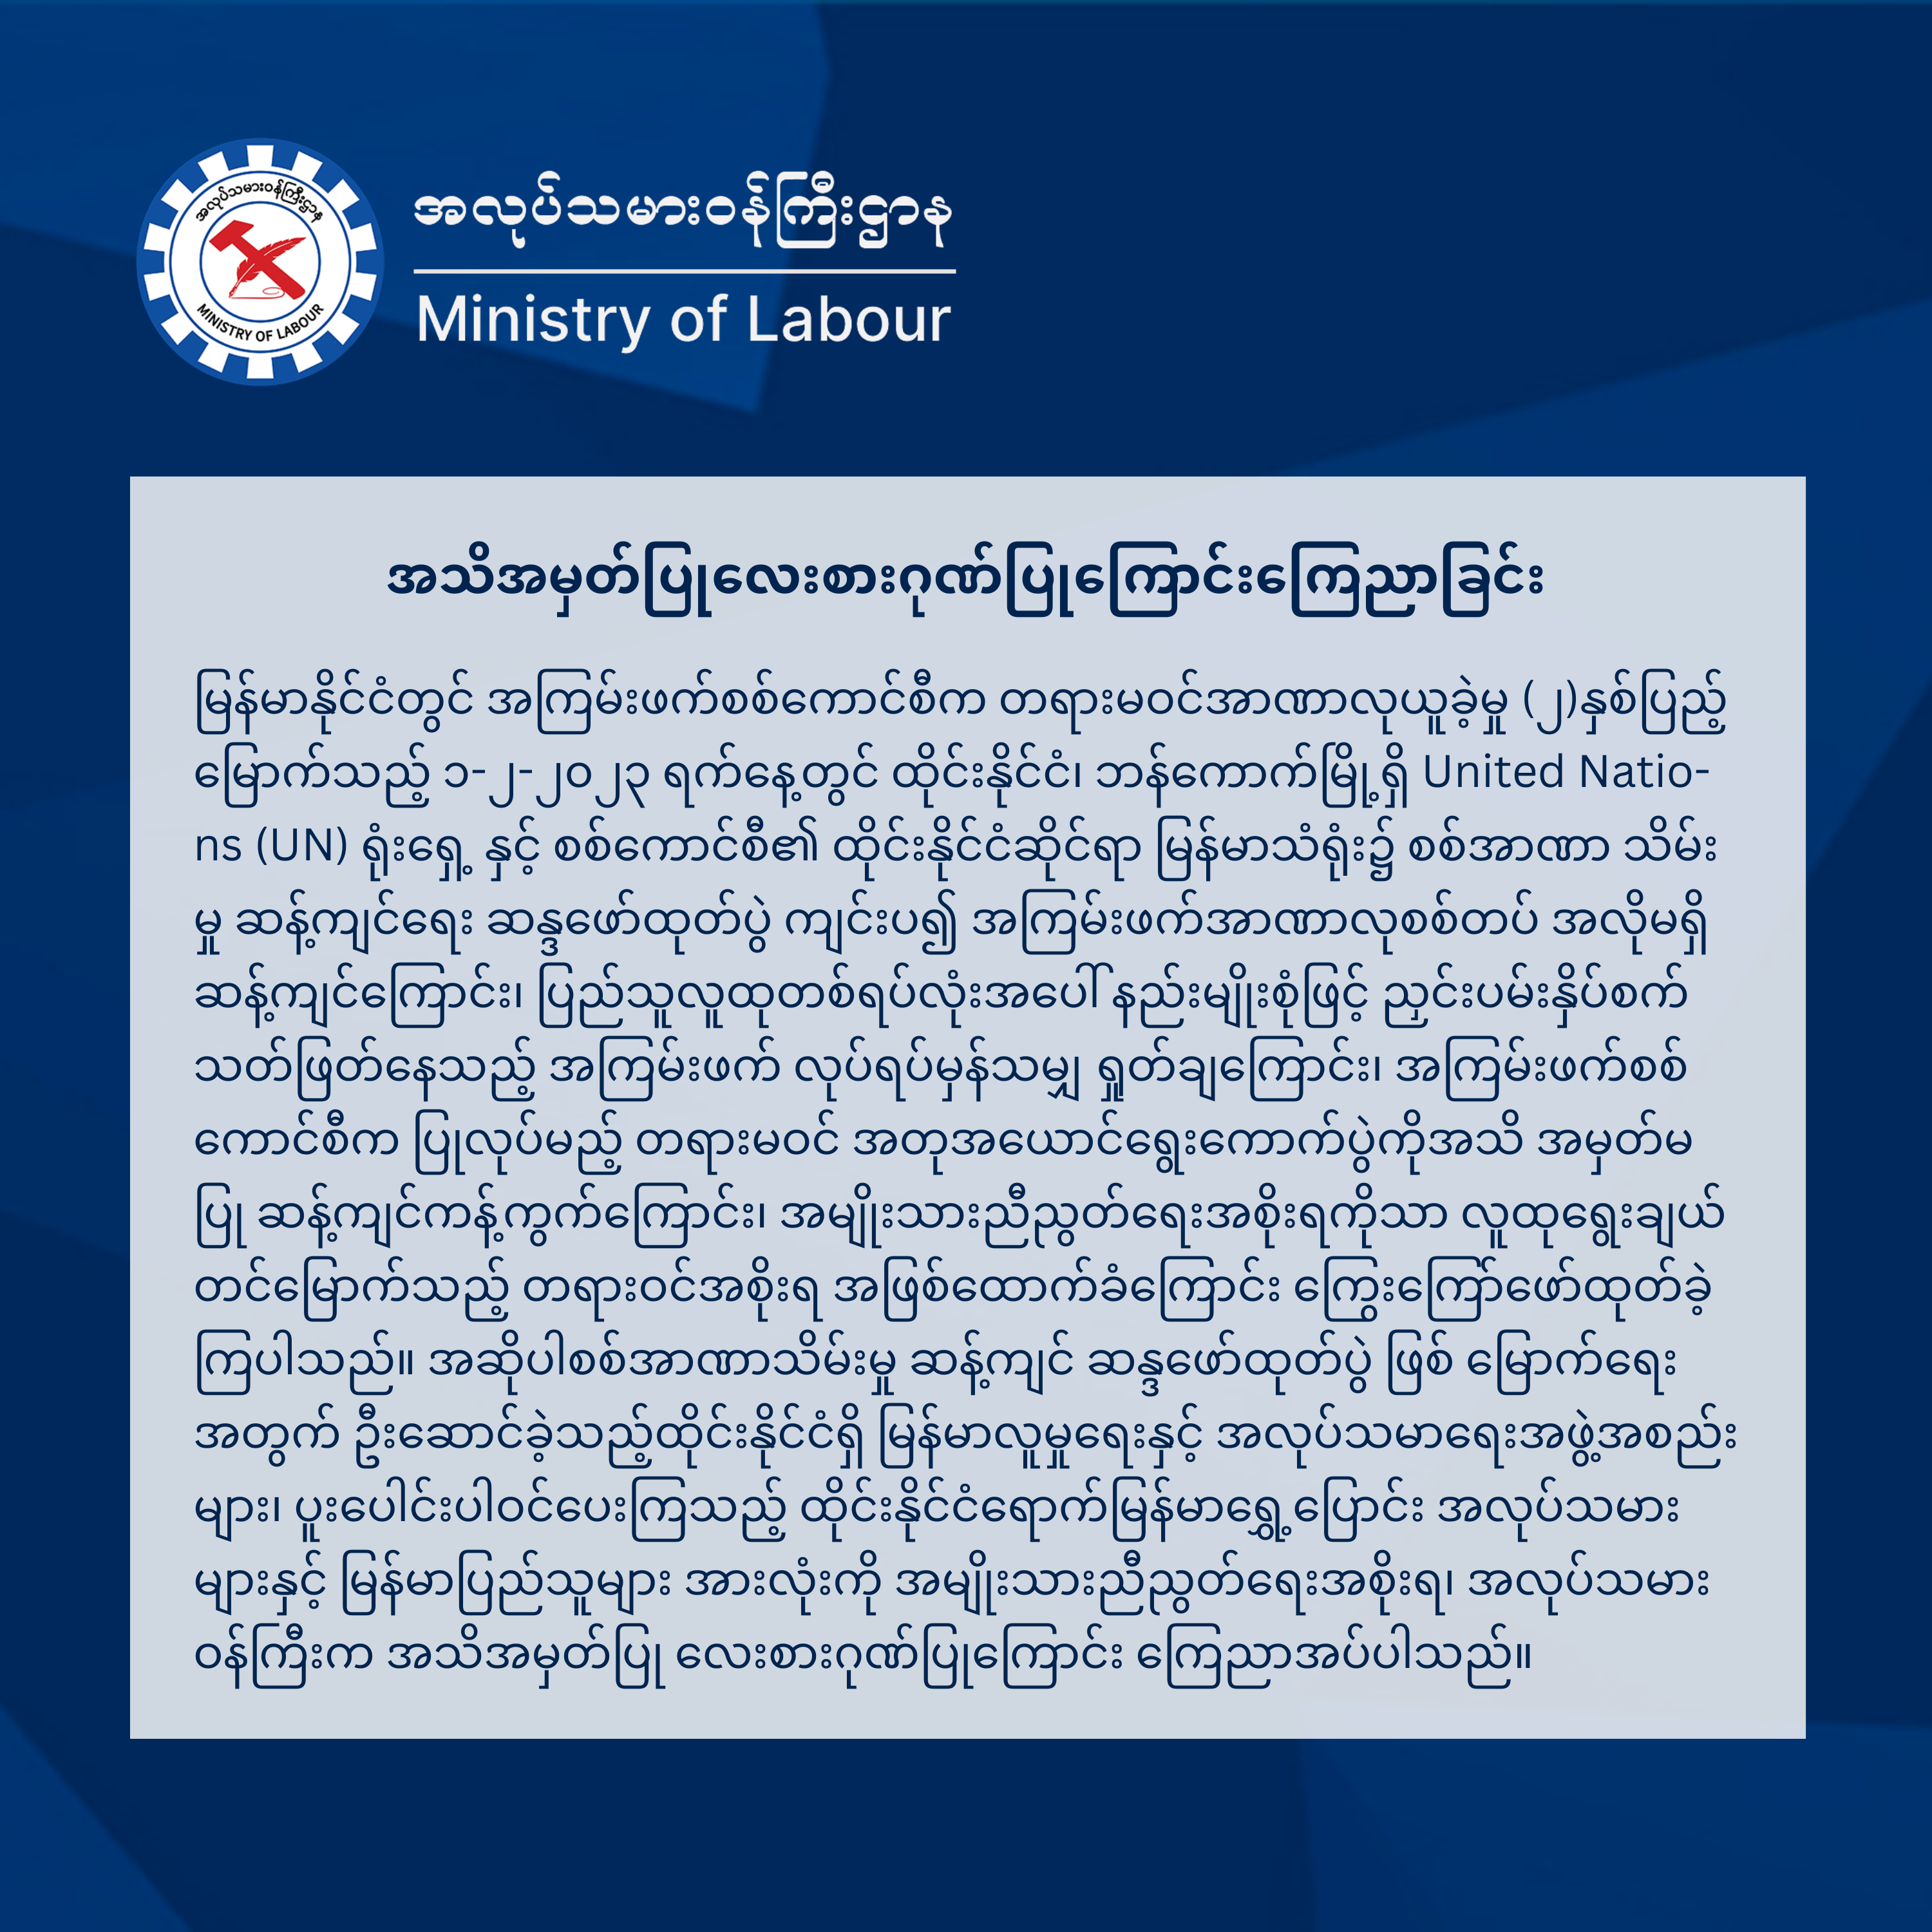 Ministry of Labour https://mol.nugmyanmar.org/my/news/recognition-and-honor-to-all-the-myanmar-people-in-thailand/